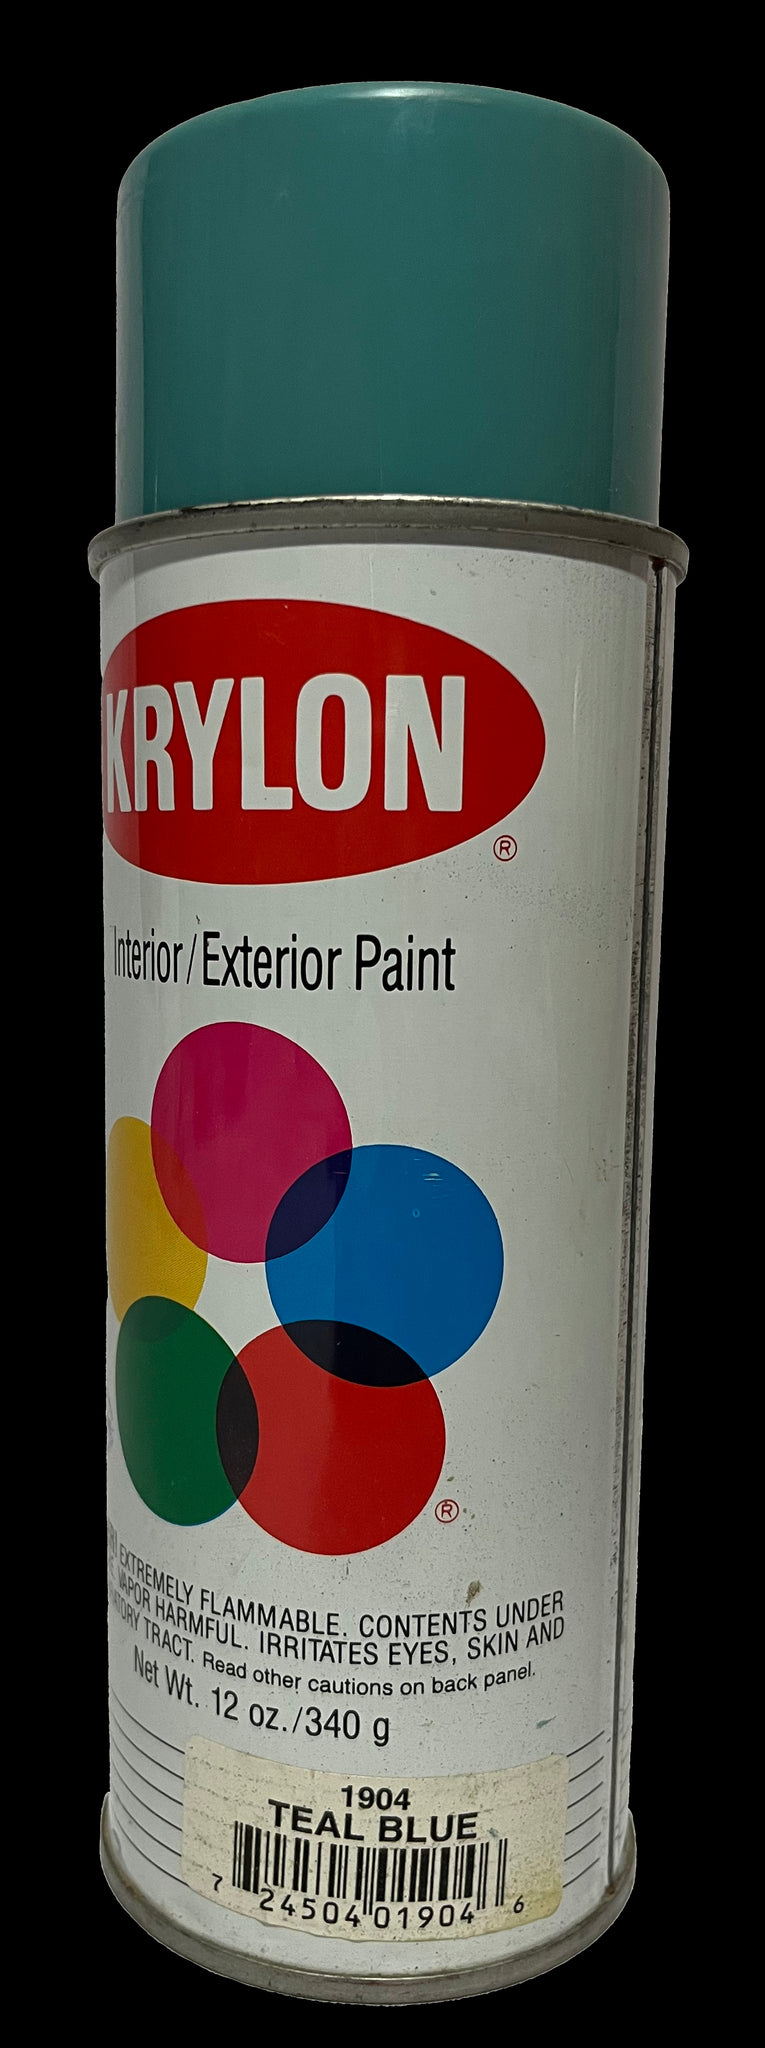 VINTAGE KRYLON SPRAY PAINT CAN - TEAL BLUE – Discount Beepers